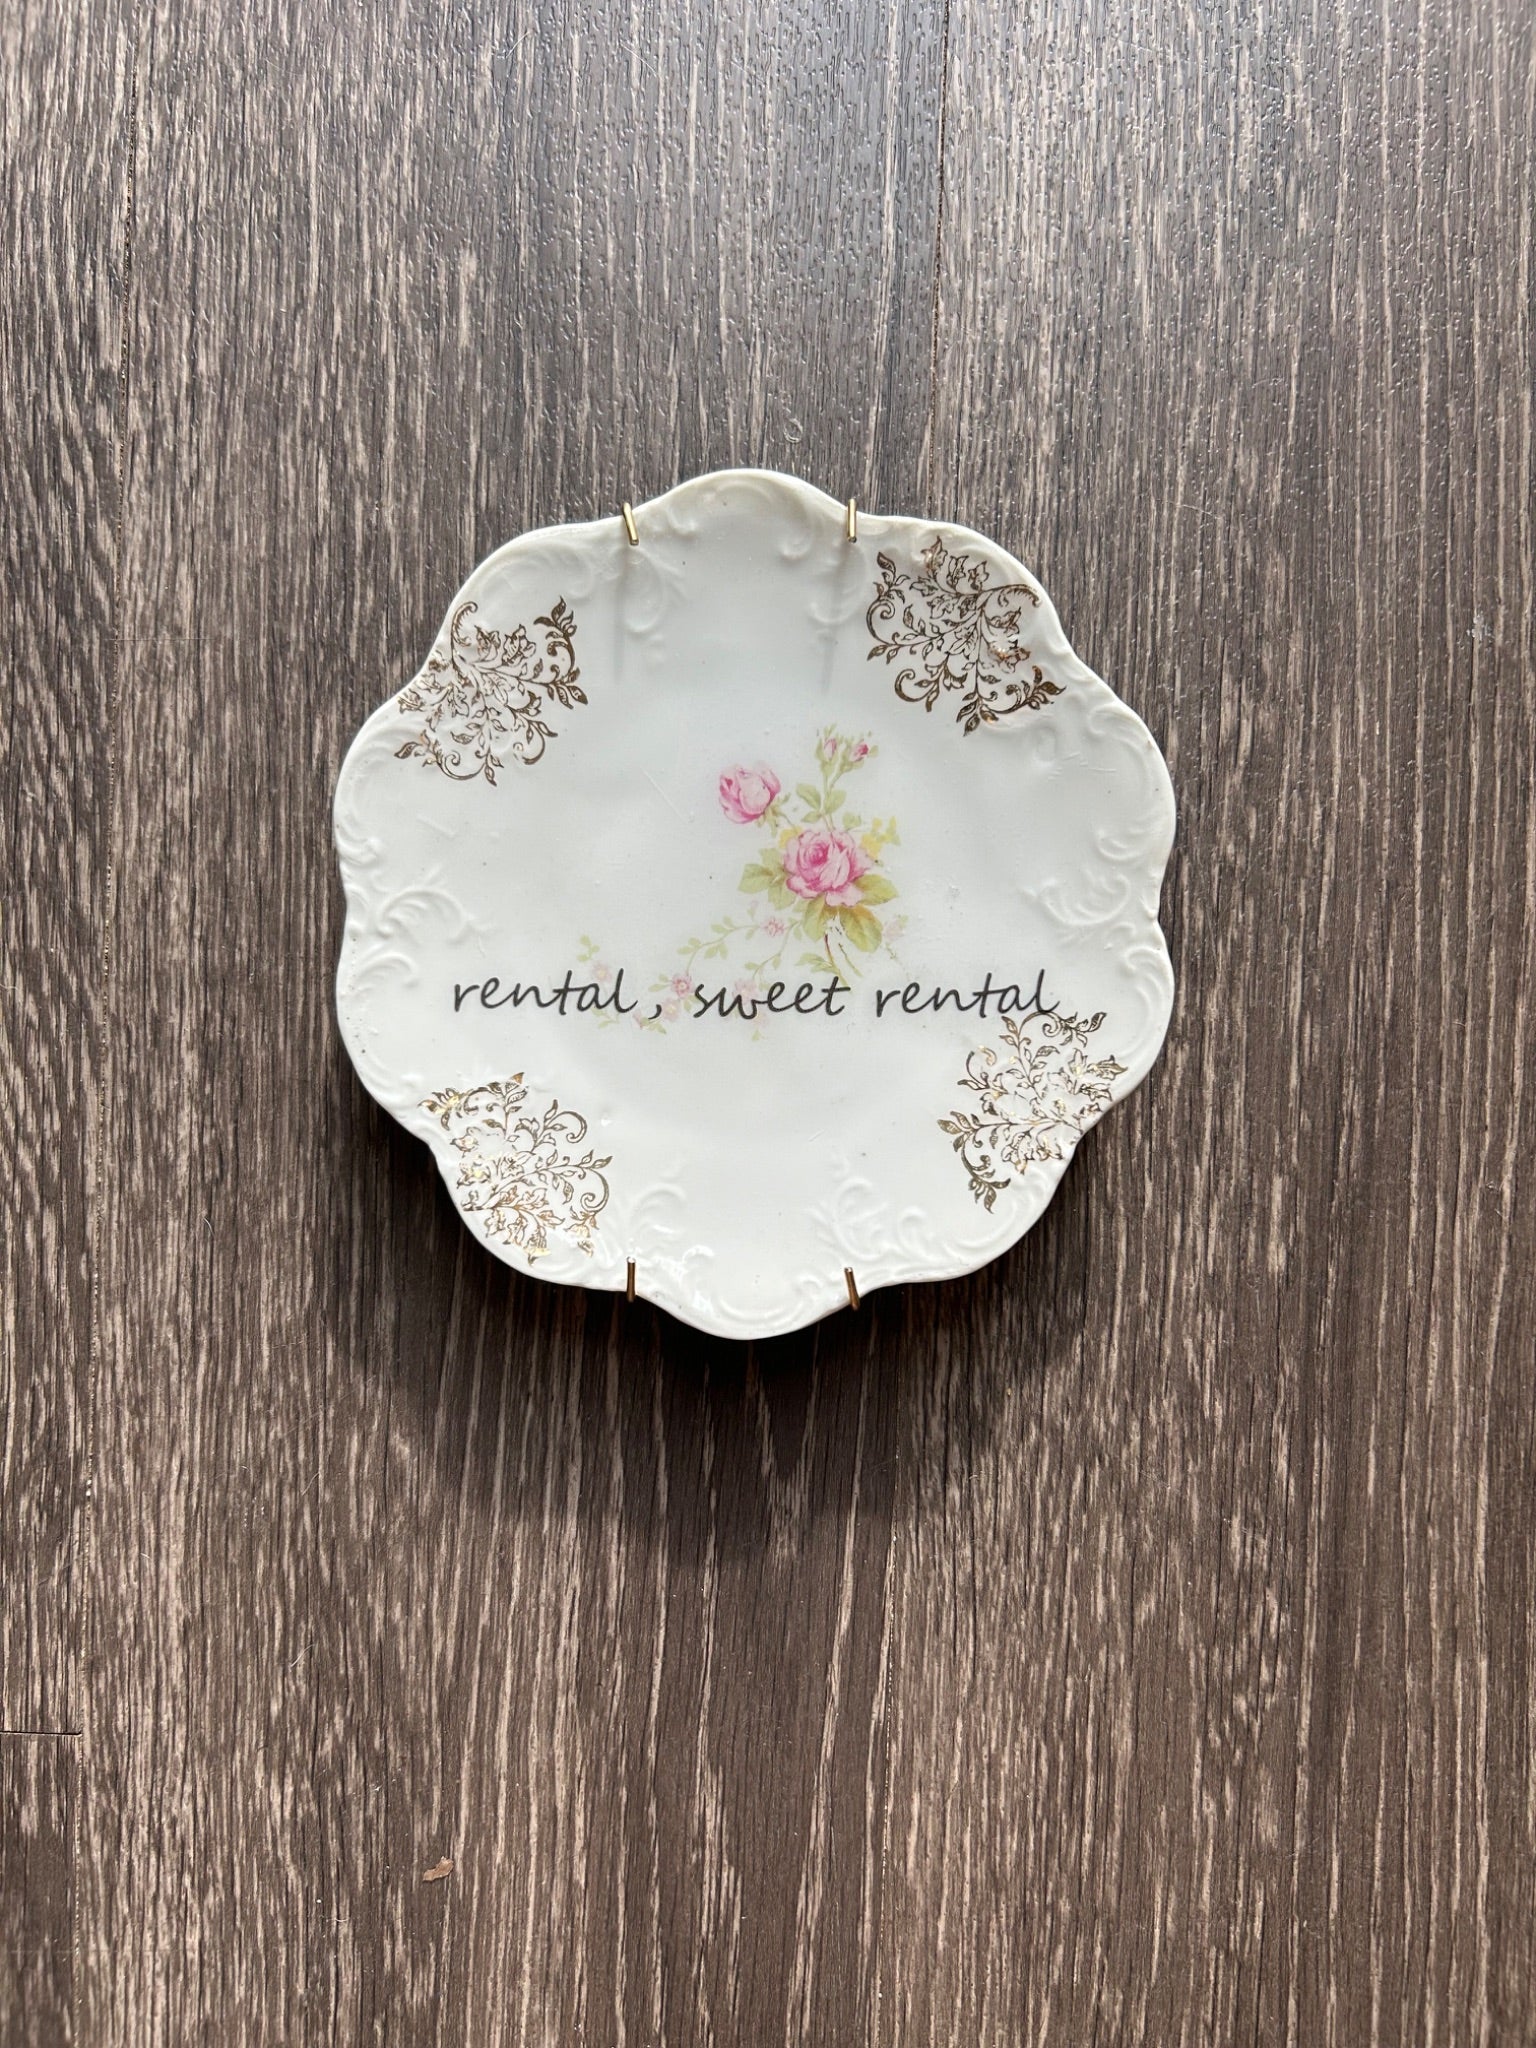 Small & Medium Sassy Plates by The Porcelain Pigeon - 22